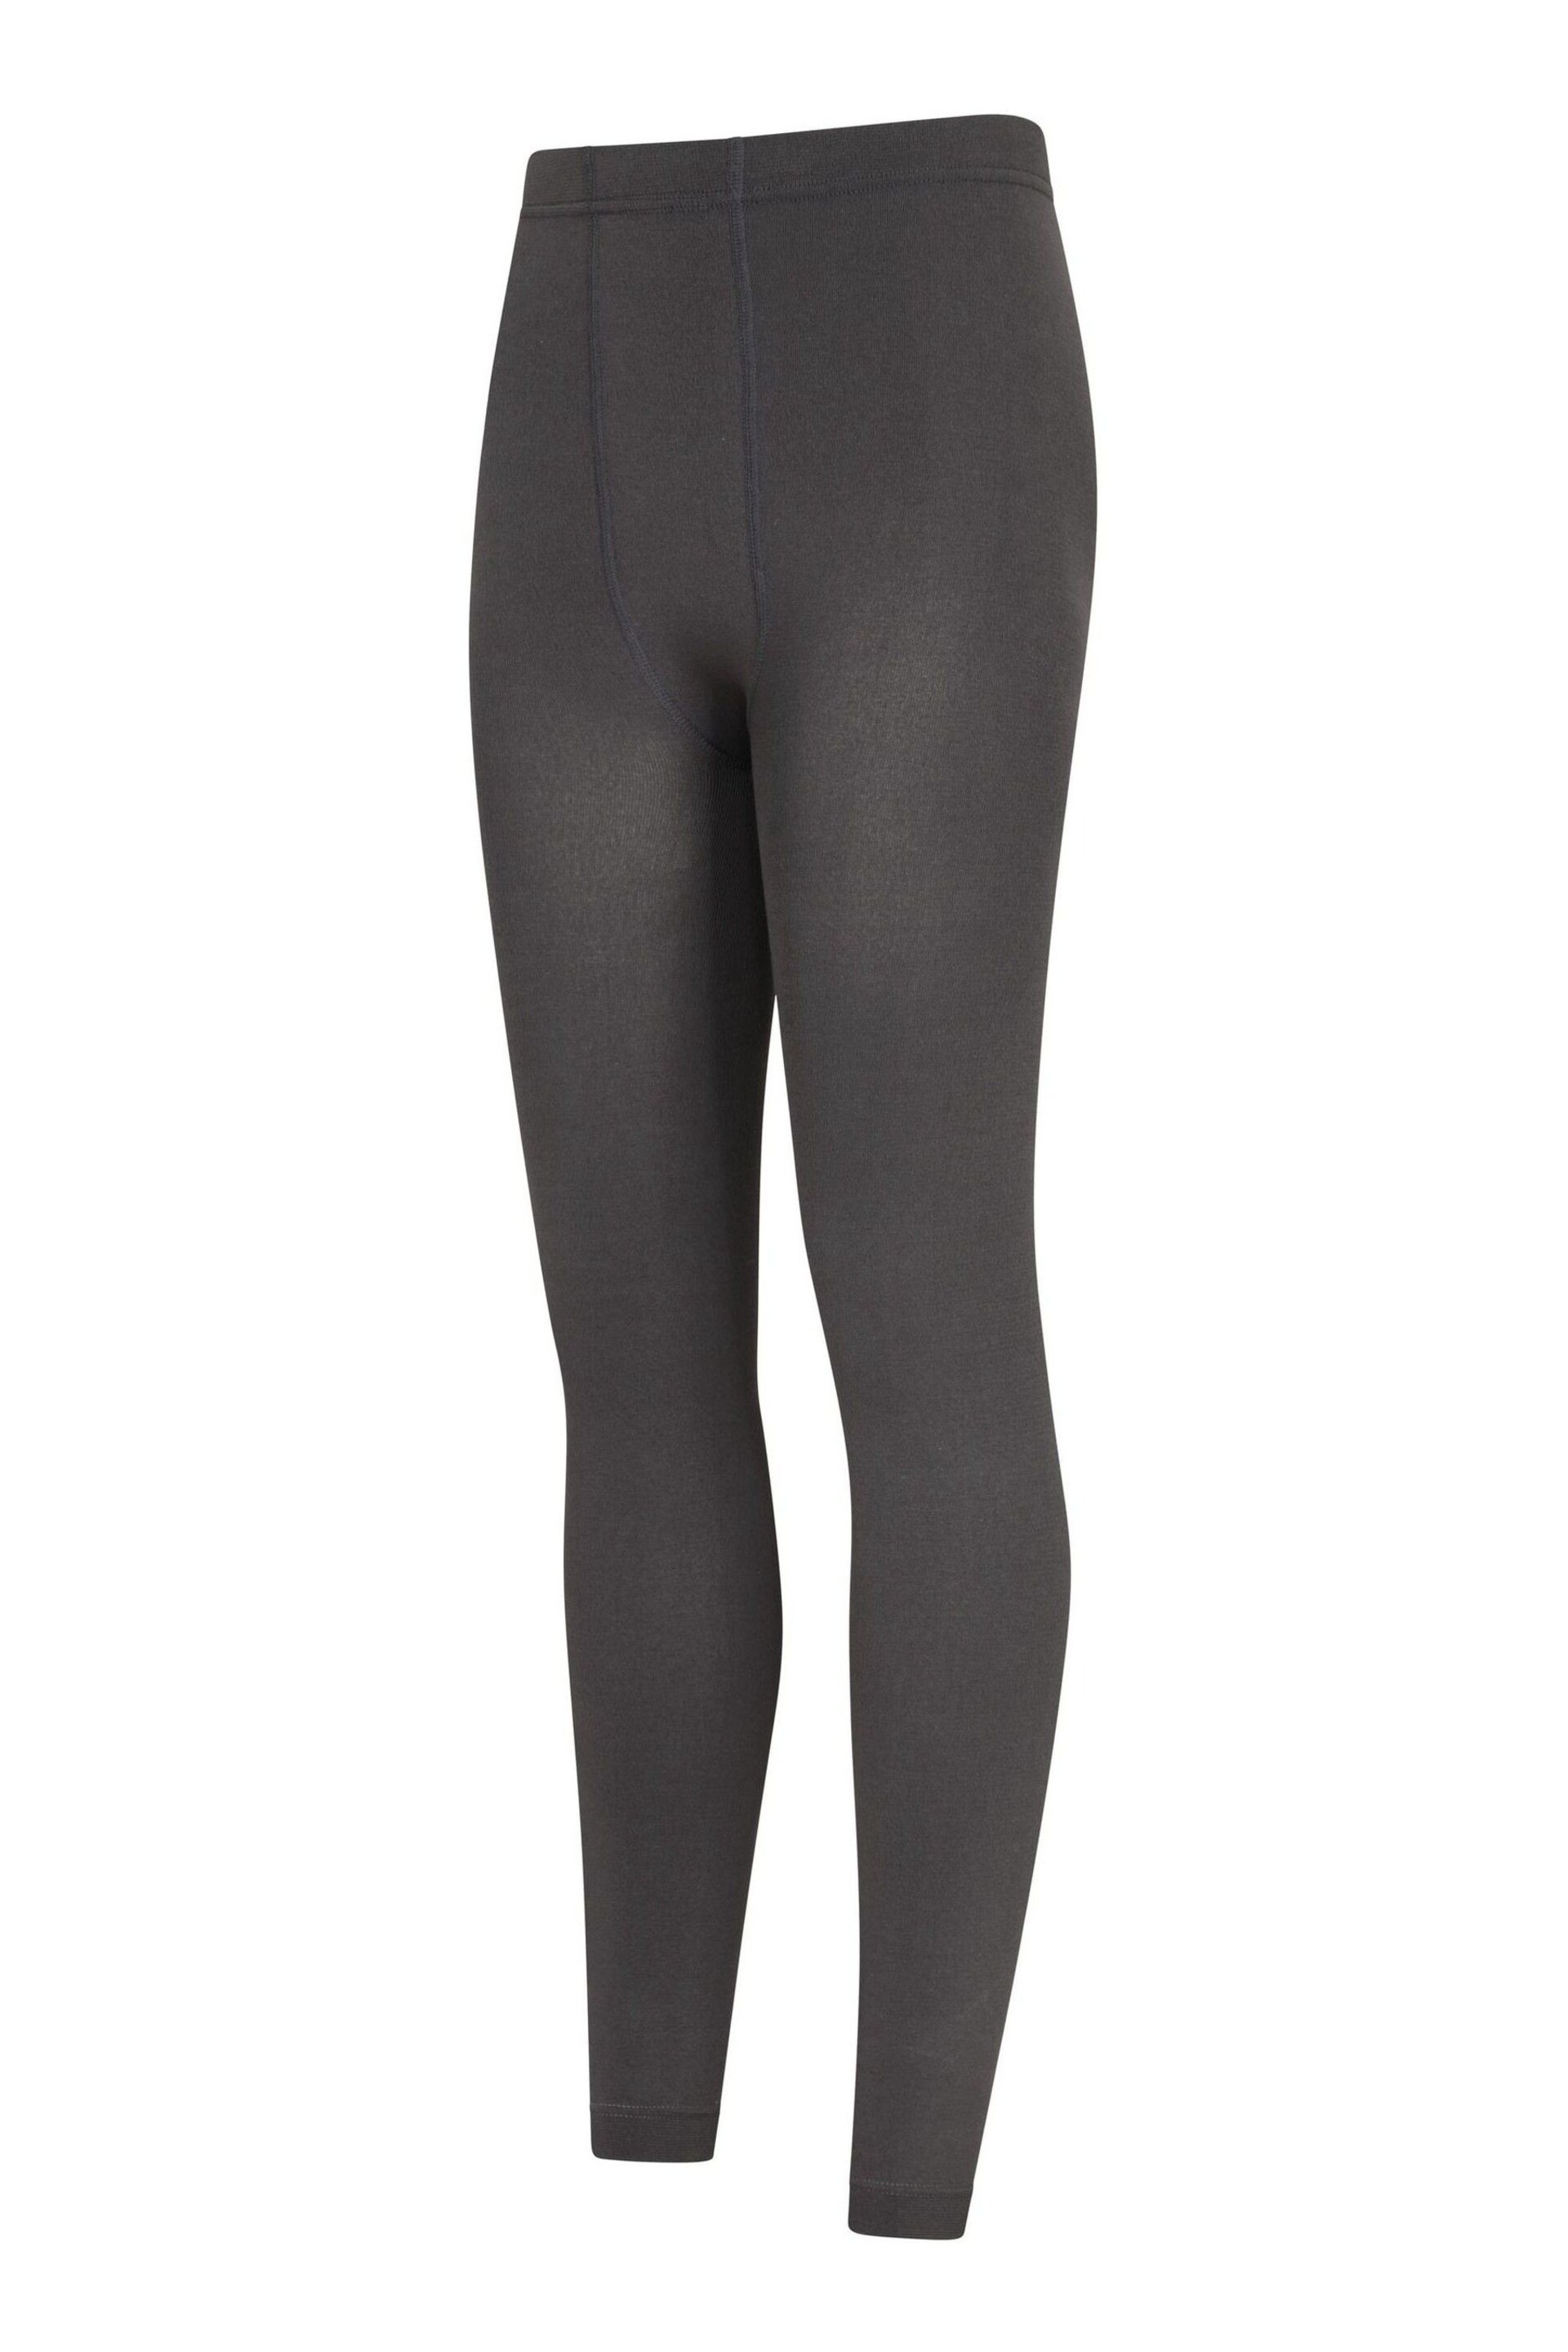 Mountain Warehouse Grey Womens Fluffy Fleece Lined Thermal Leggings - Image 4 of 5